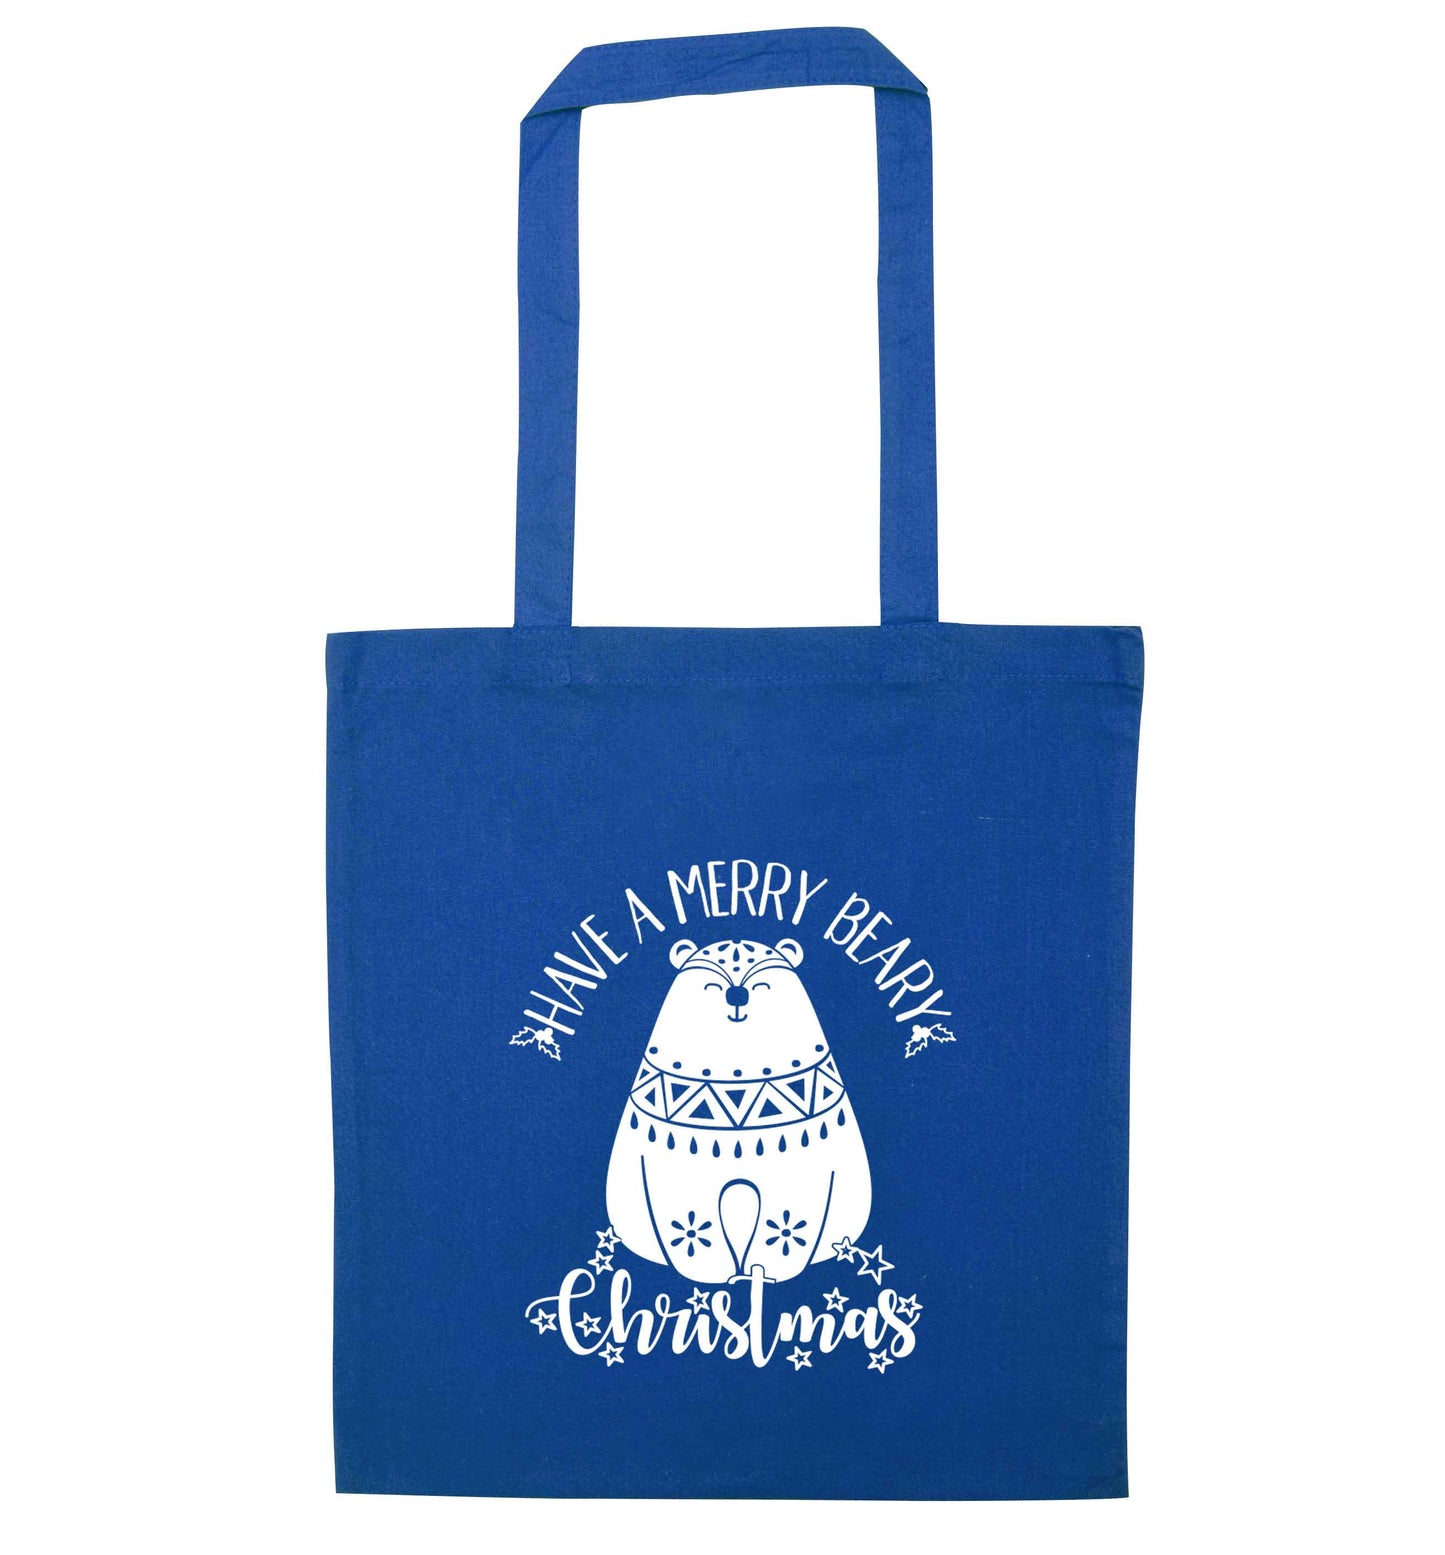 Have a merry beary Christmas blue tote bag